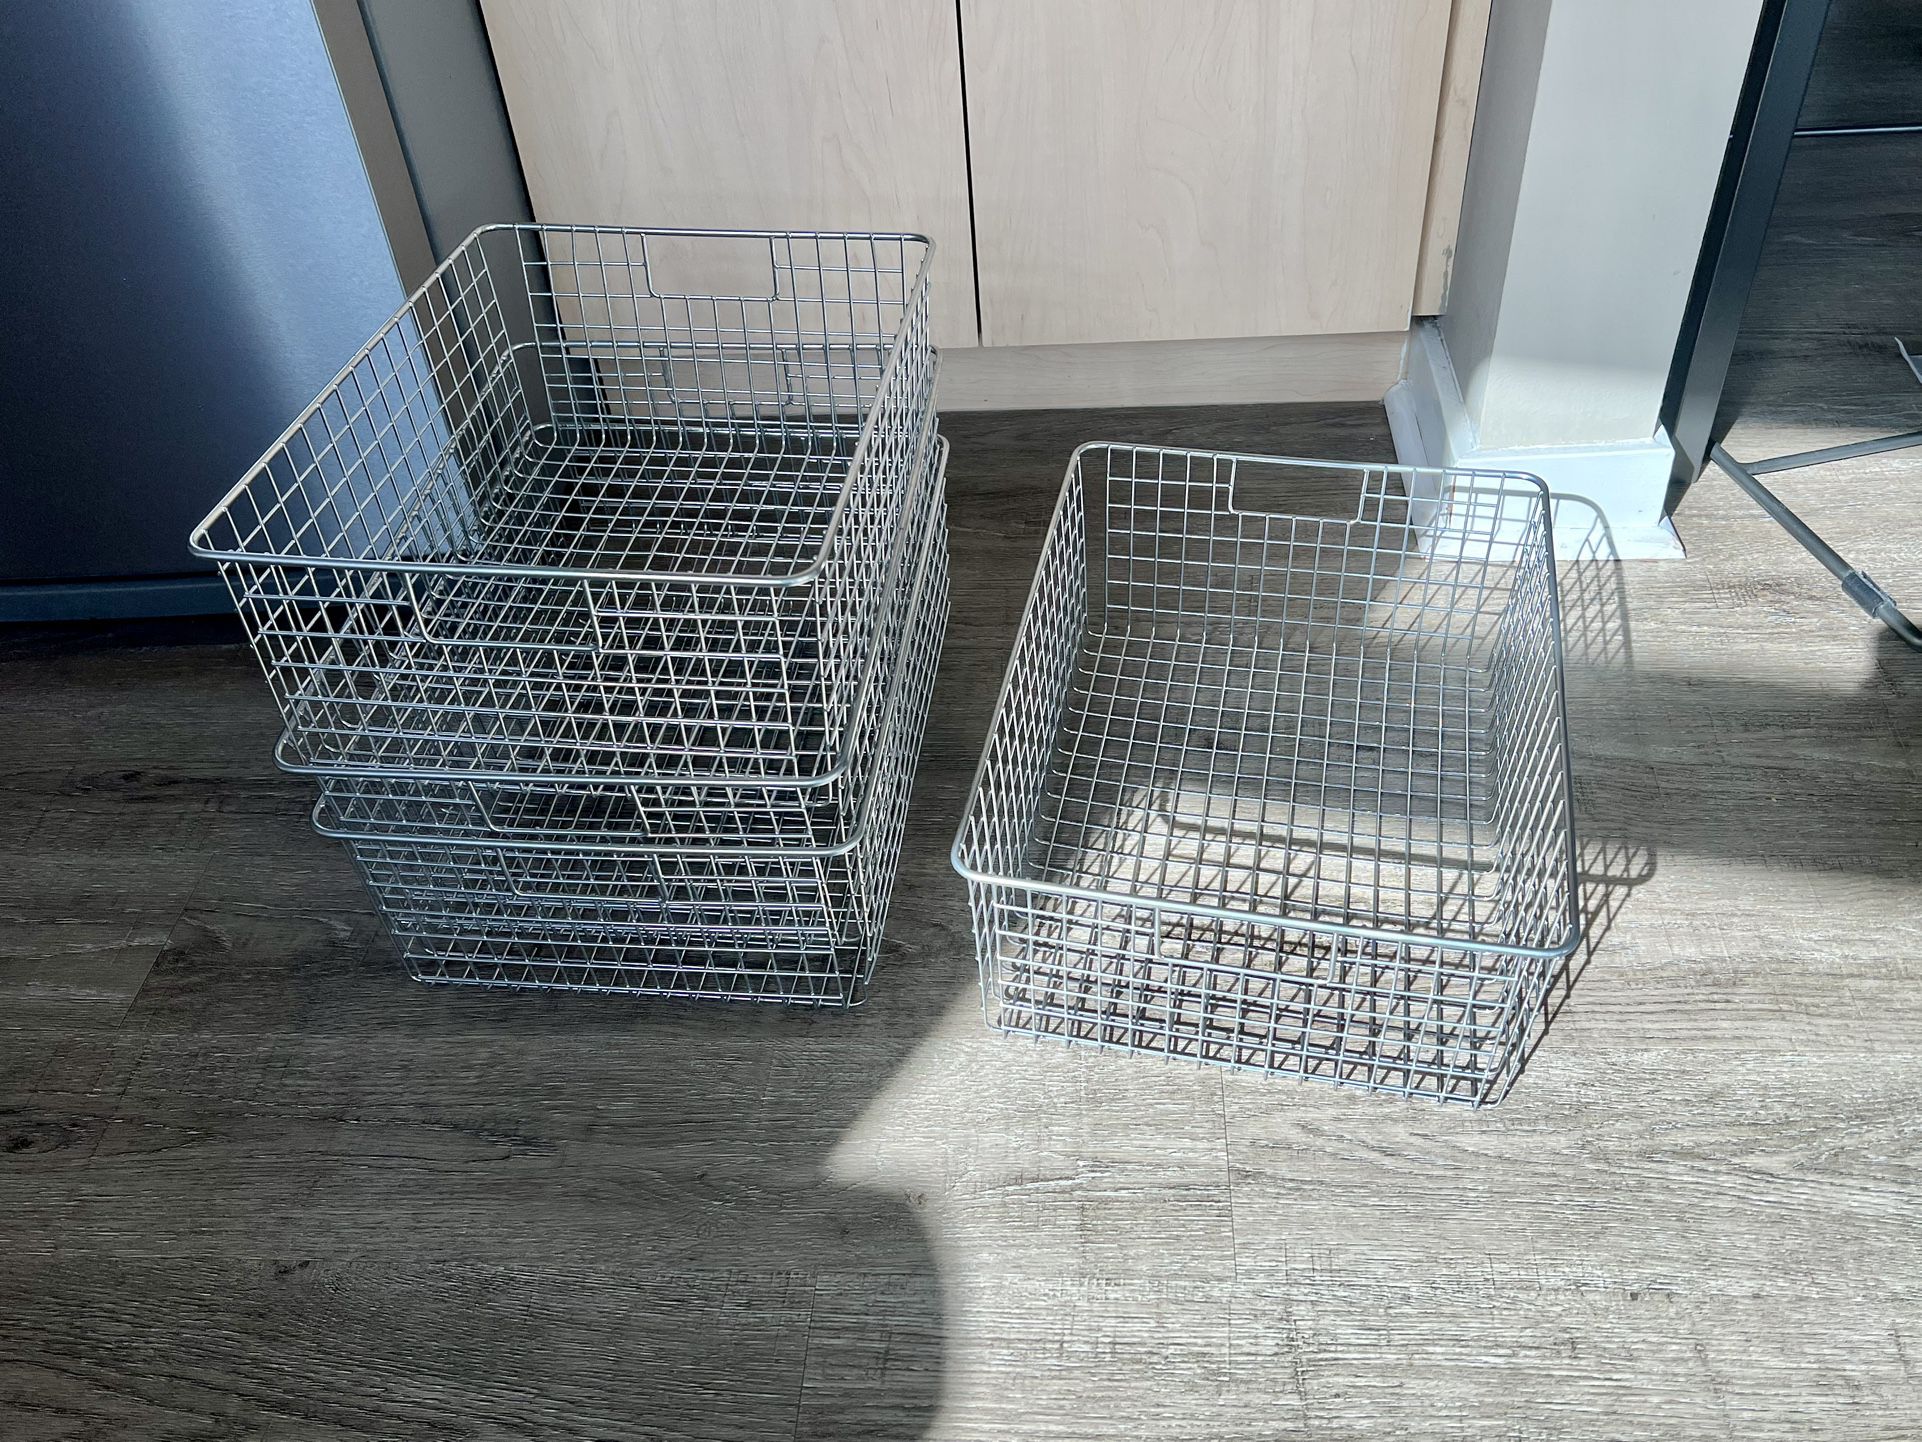 Set Of 4 Large Metal Wire Basket Organizer with Handles for Organizing Kitchen Cabinets, Pantry Shelf, Bathroom, Laundry Room, Closets, Garage